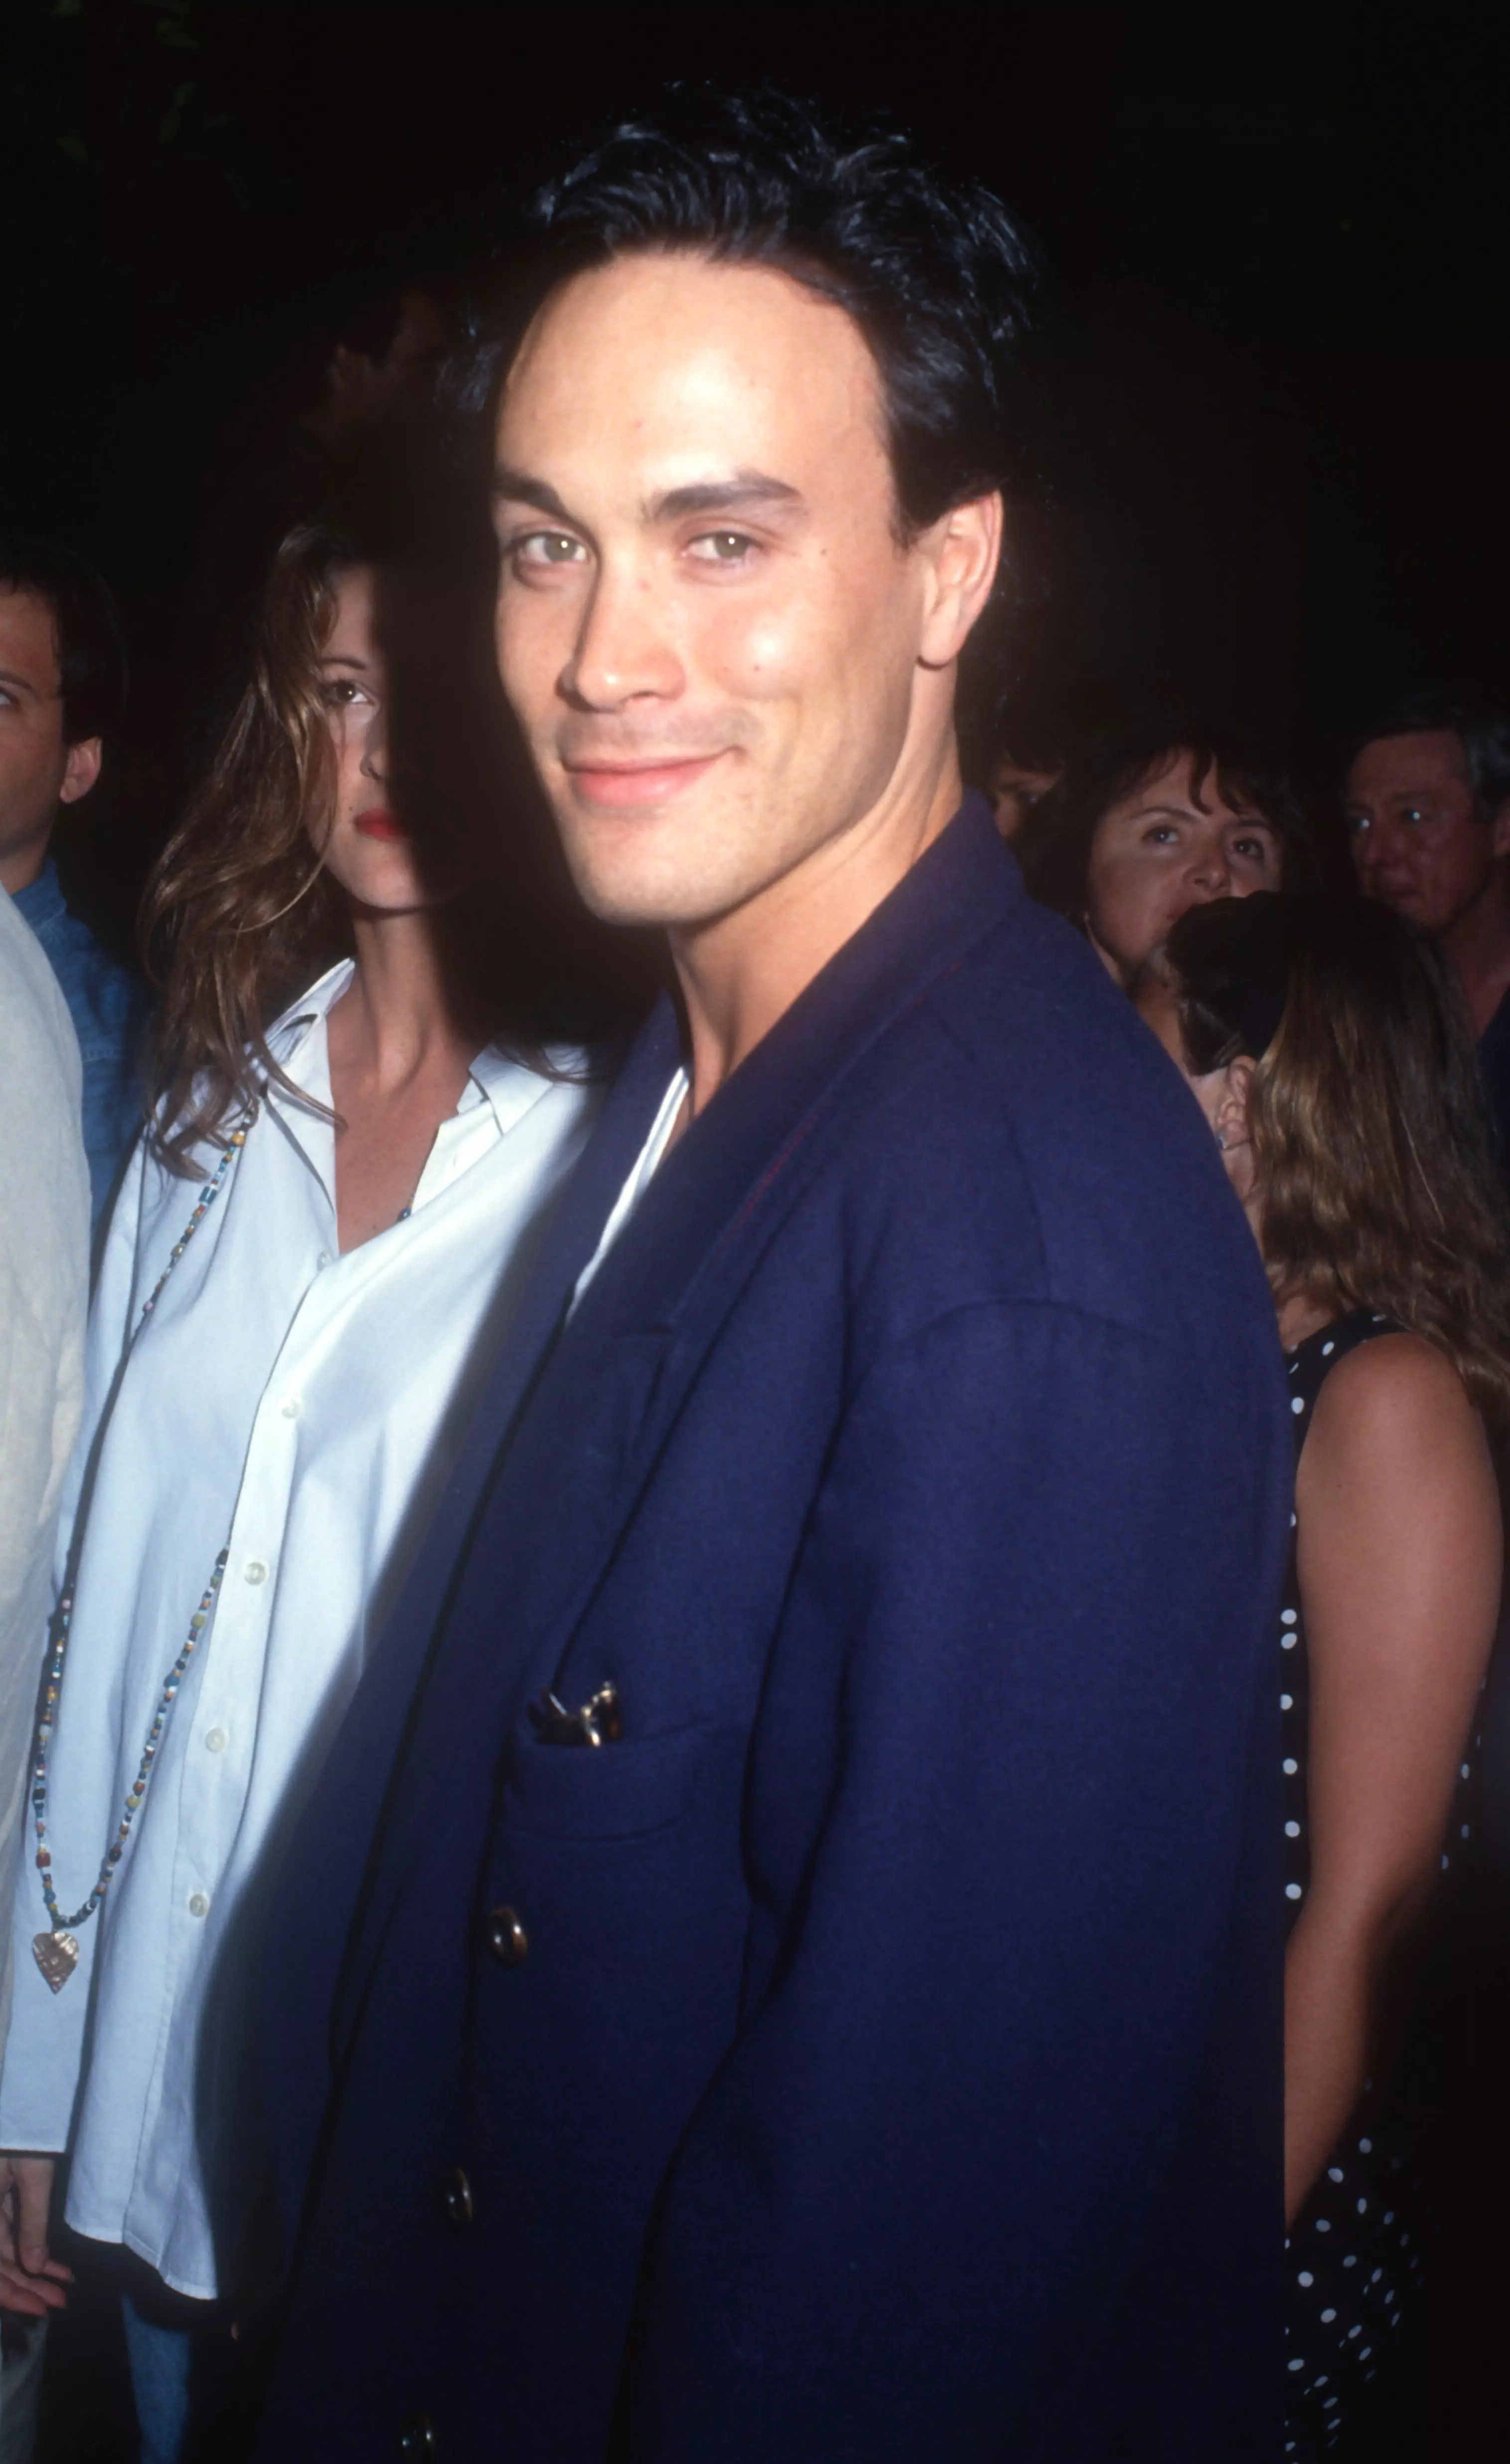 Brandon Lee at the premiere of Point Break in 1991.